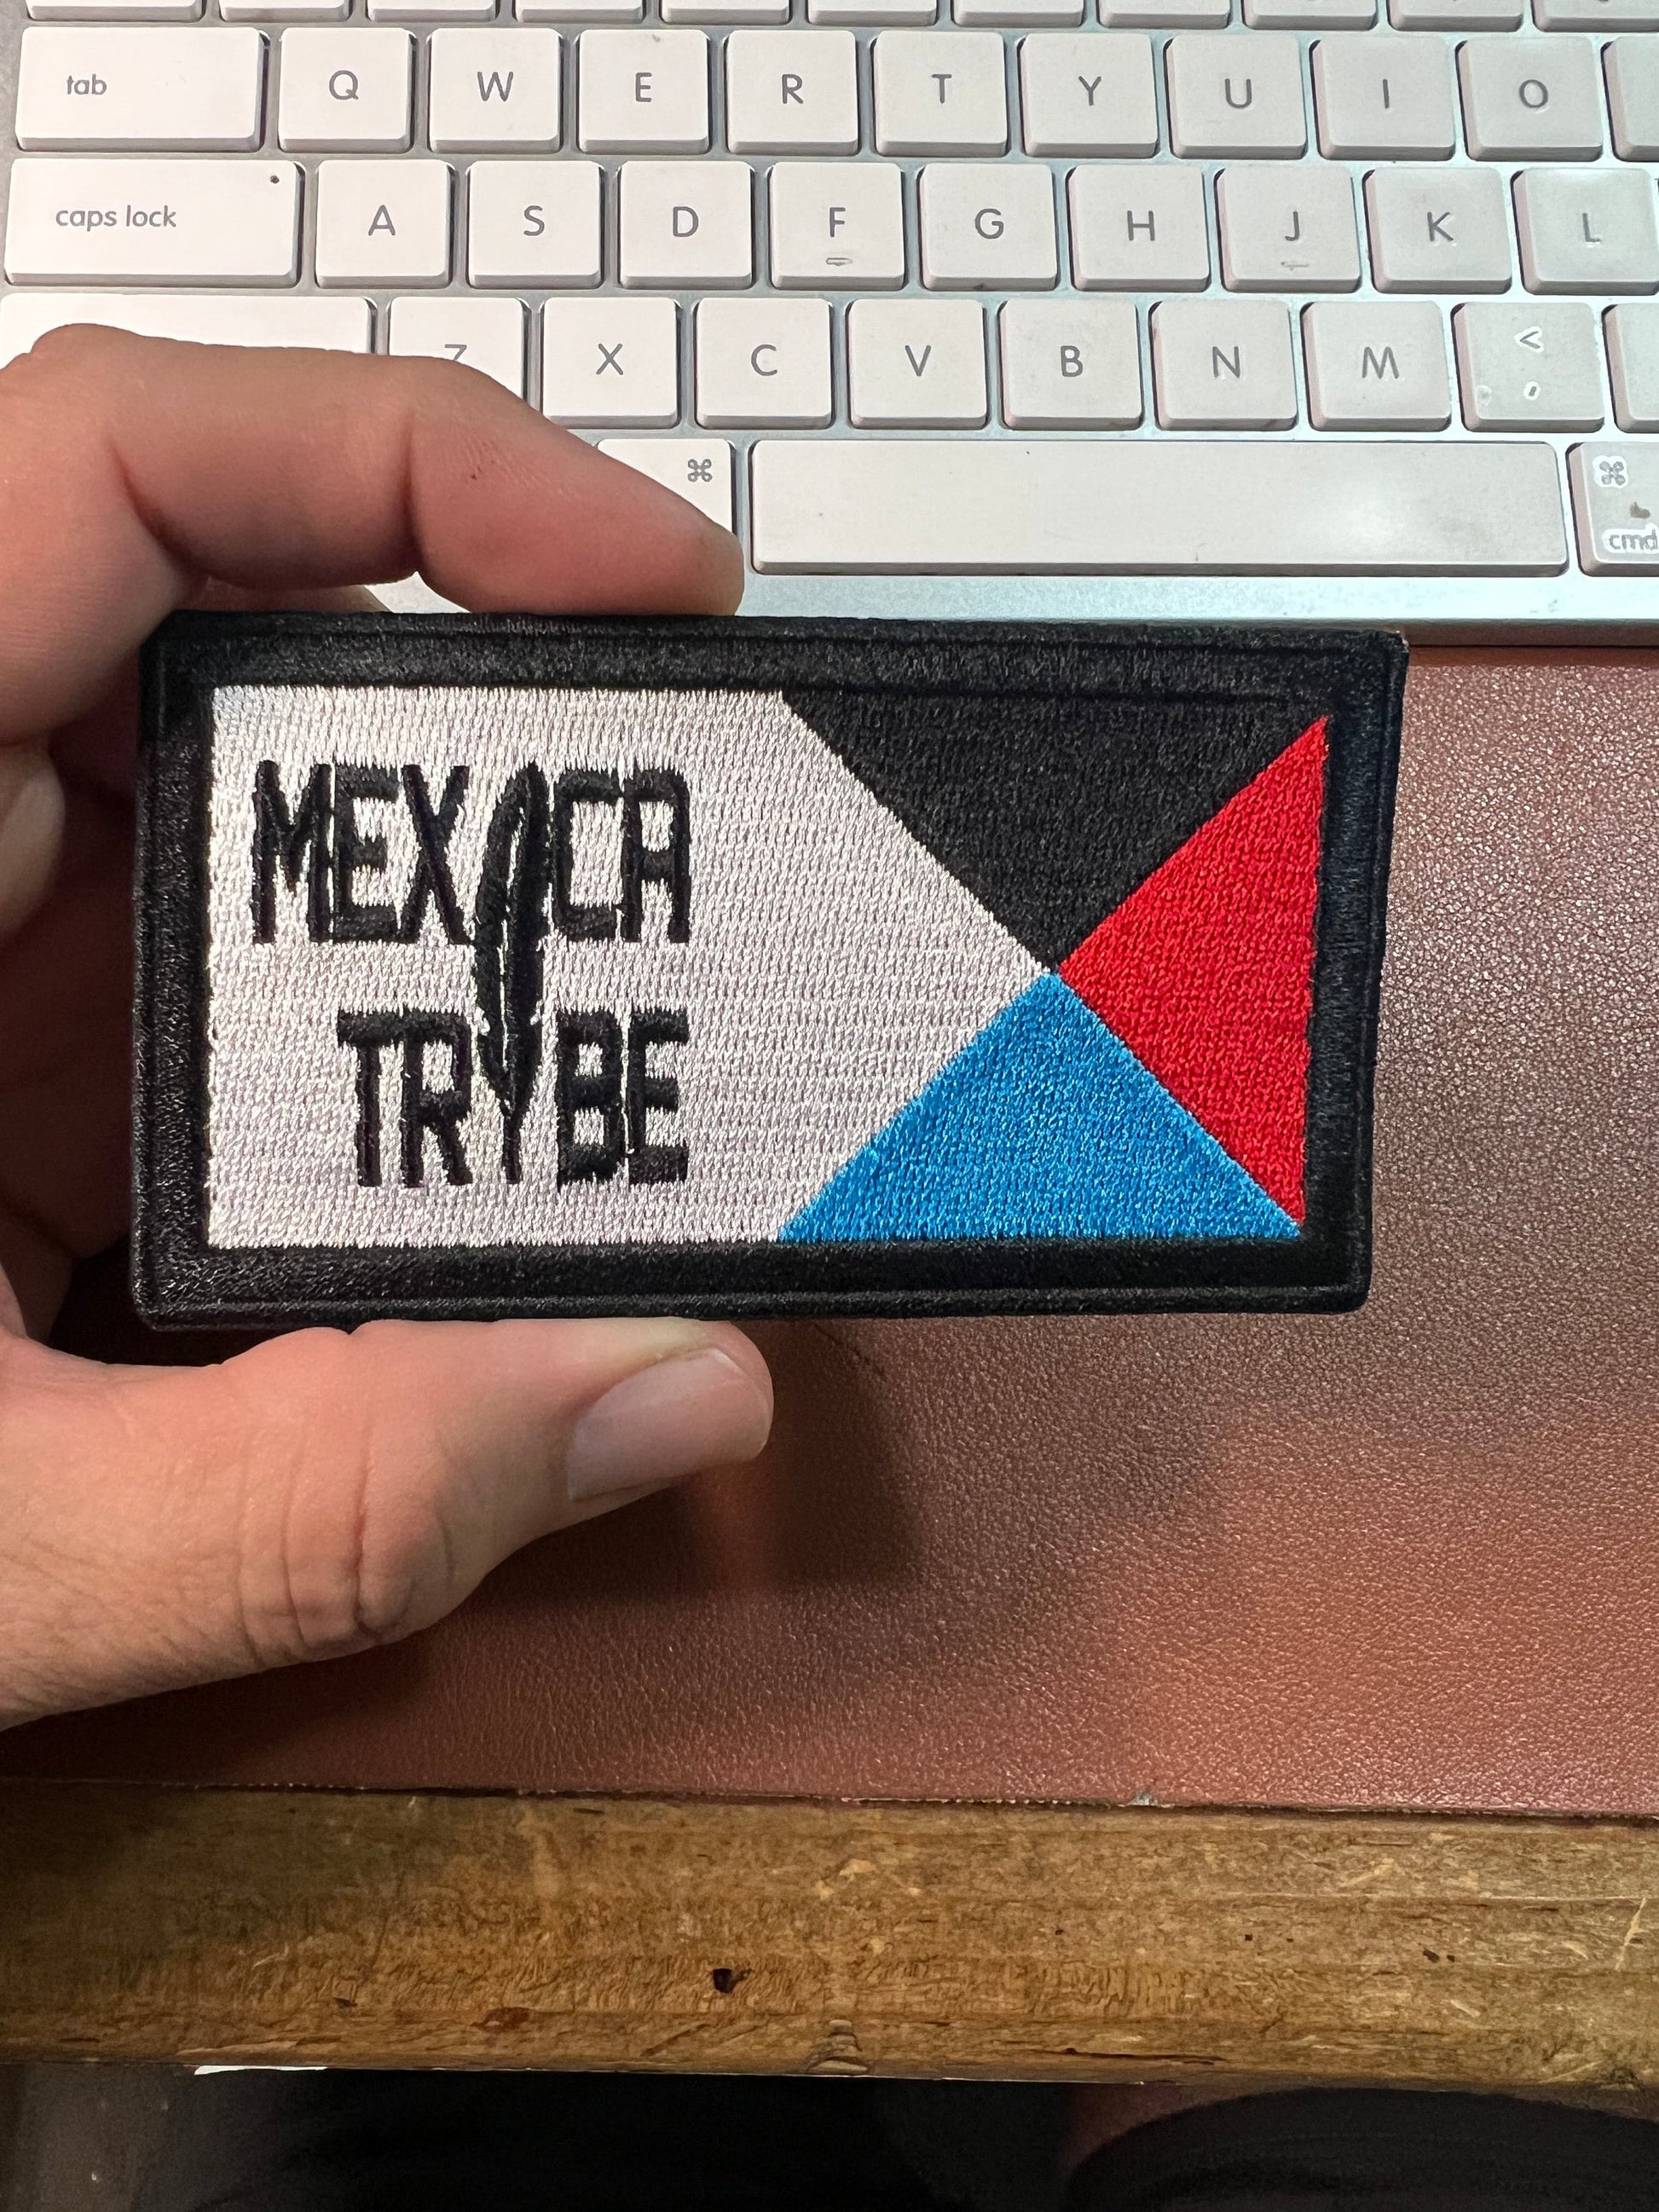 Mexica Tribe patch Tenochtitlan, Feather i, Mexico, Tribal Flag, Eagle atl-tlachinolli water-fire symbol, 4 color directions iron-on patches